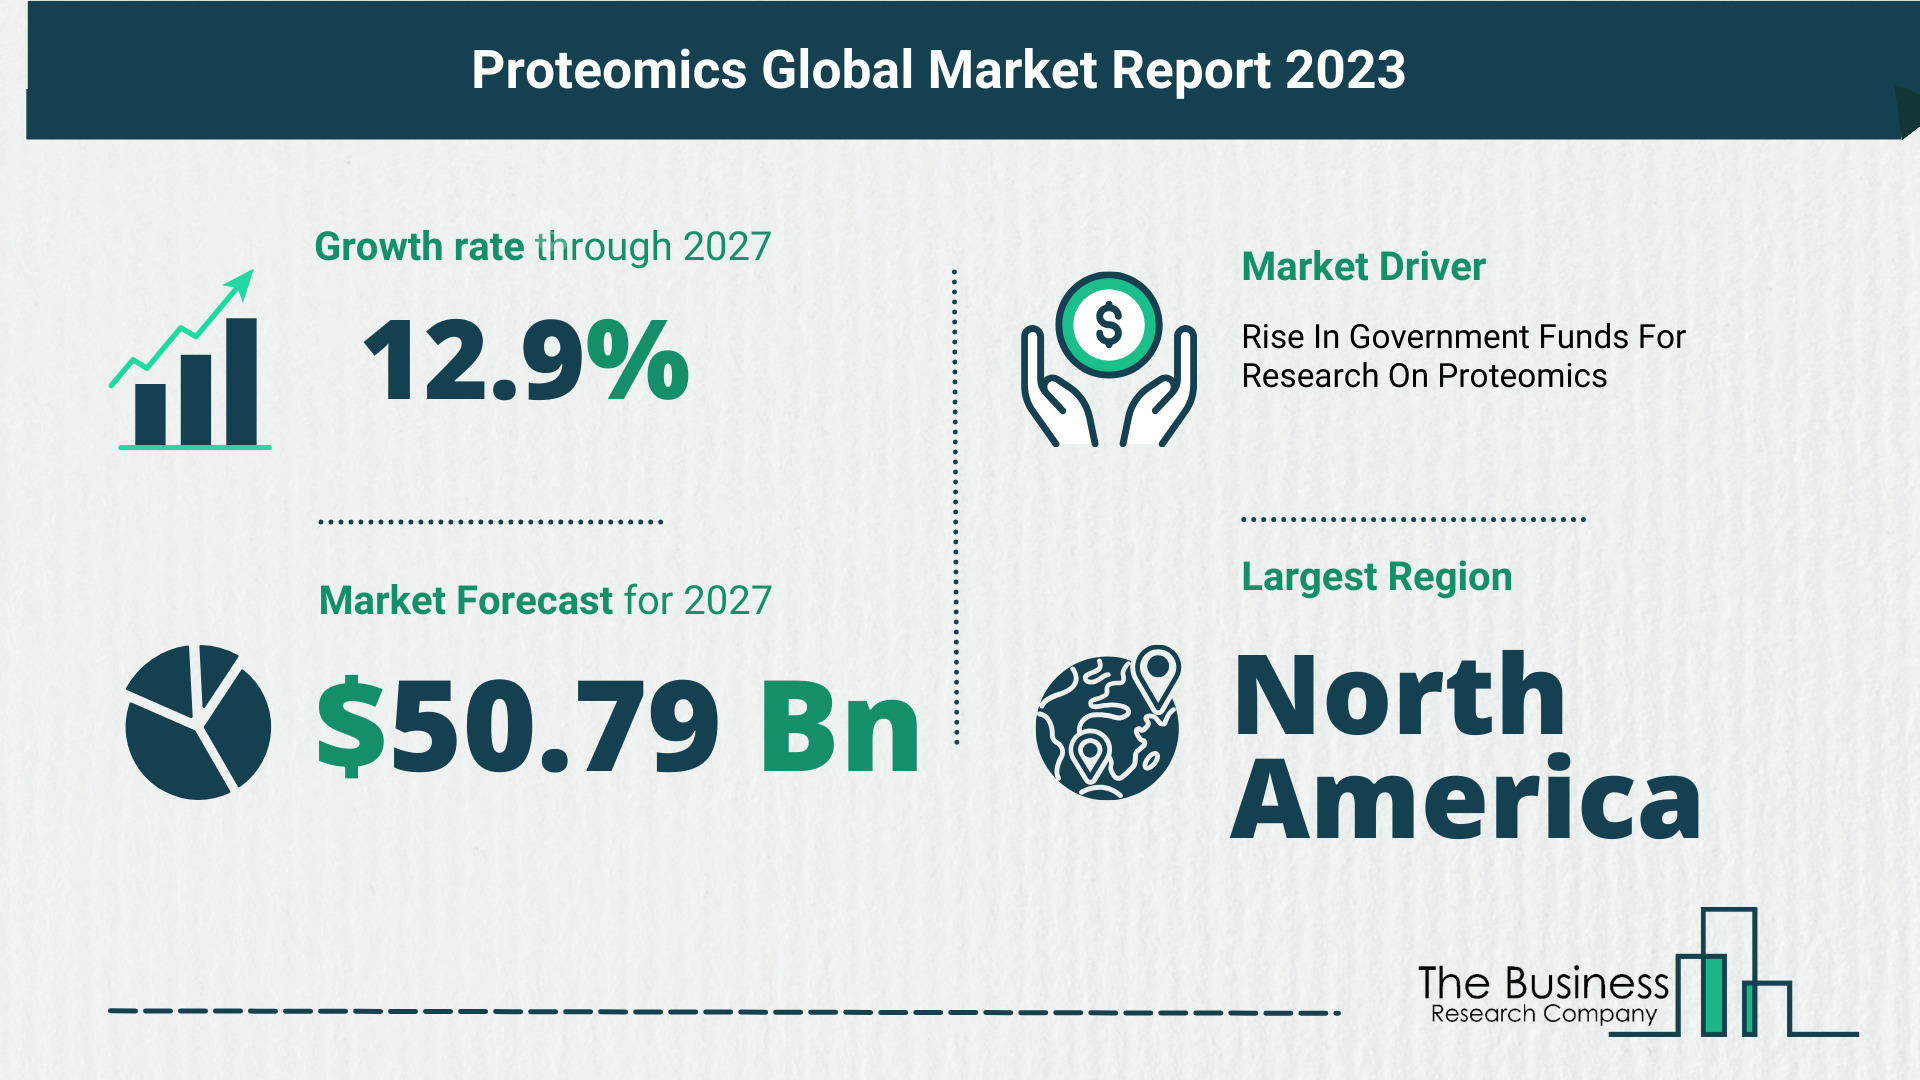 Global Proteomics Market Analysis: Estimated Market Size And Growth Rate